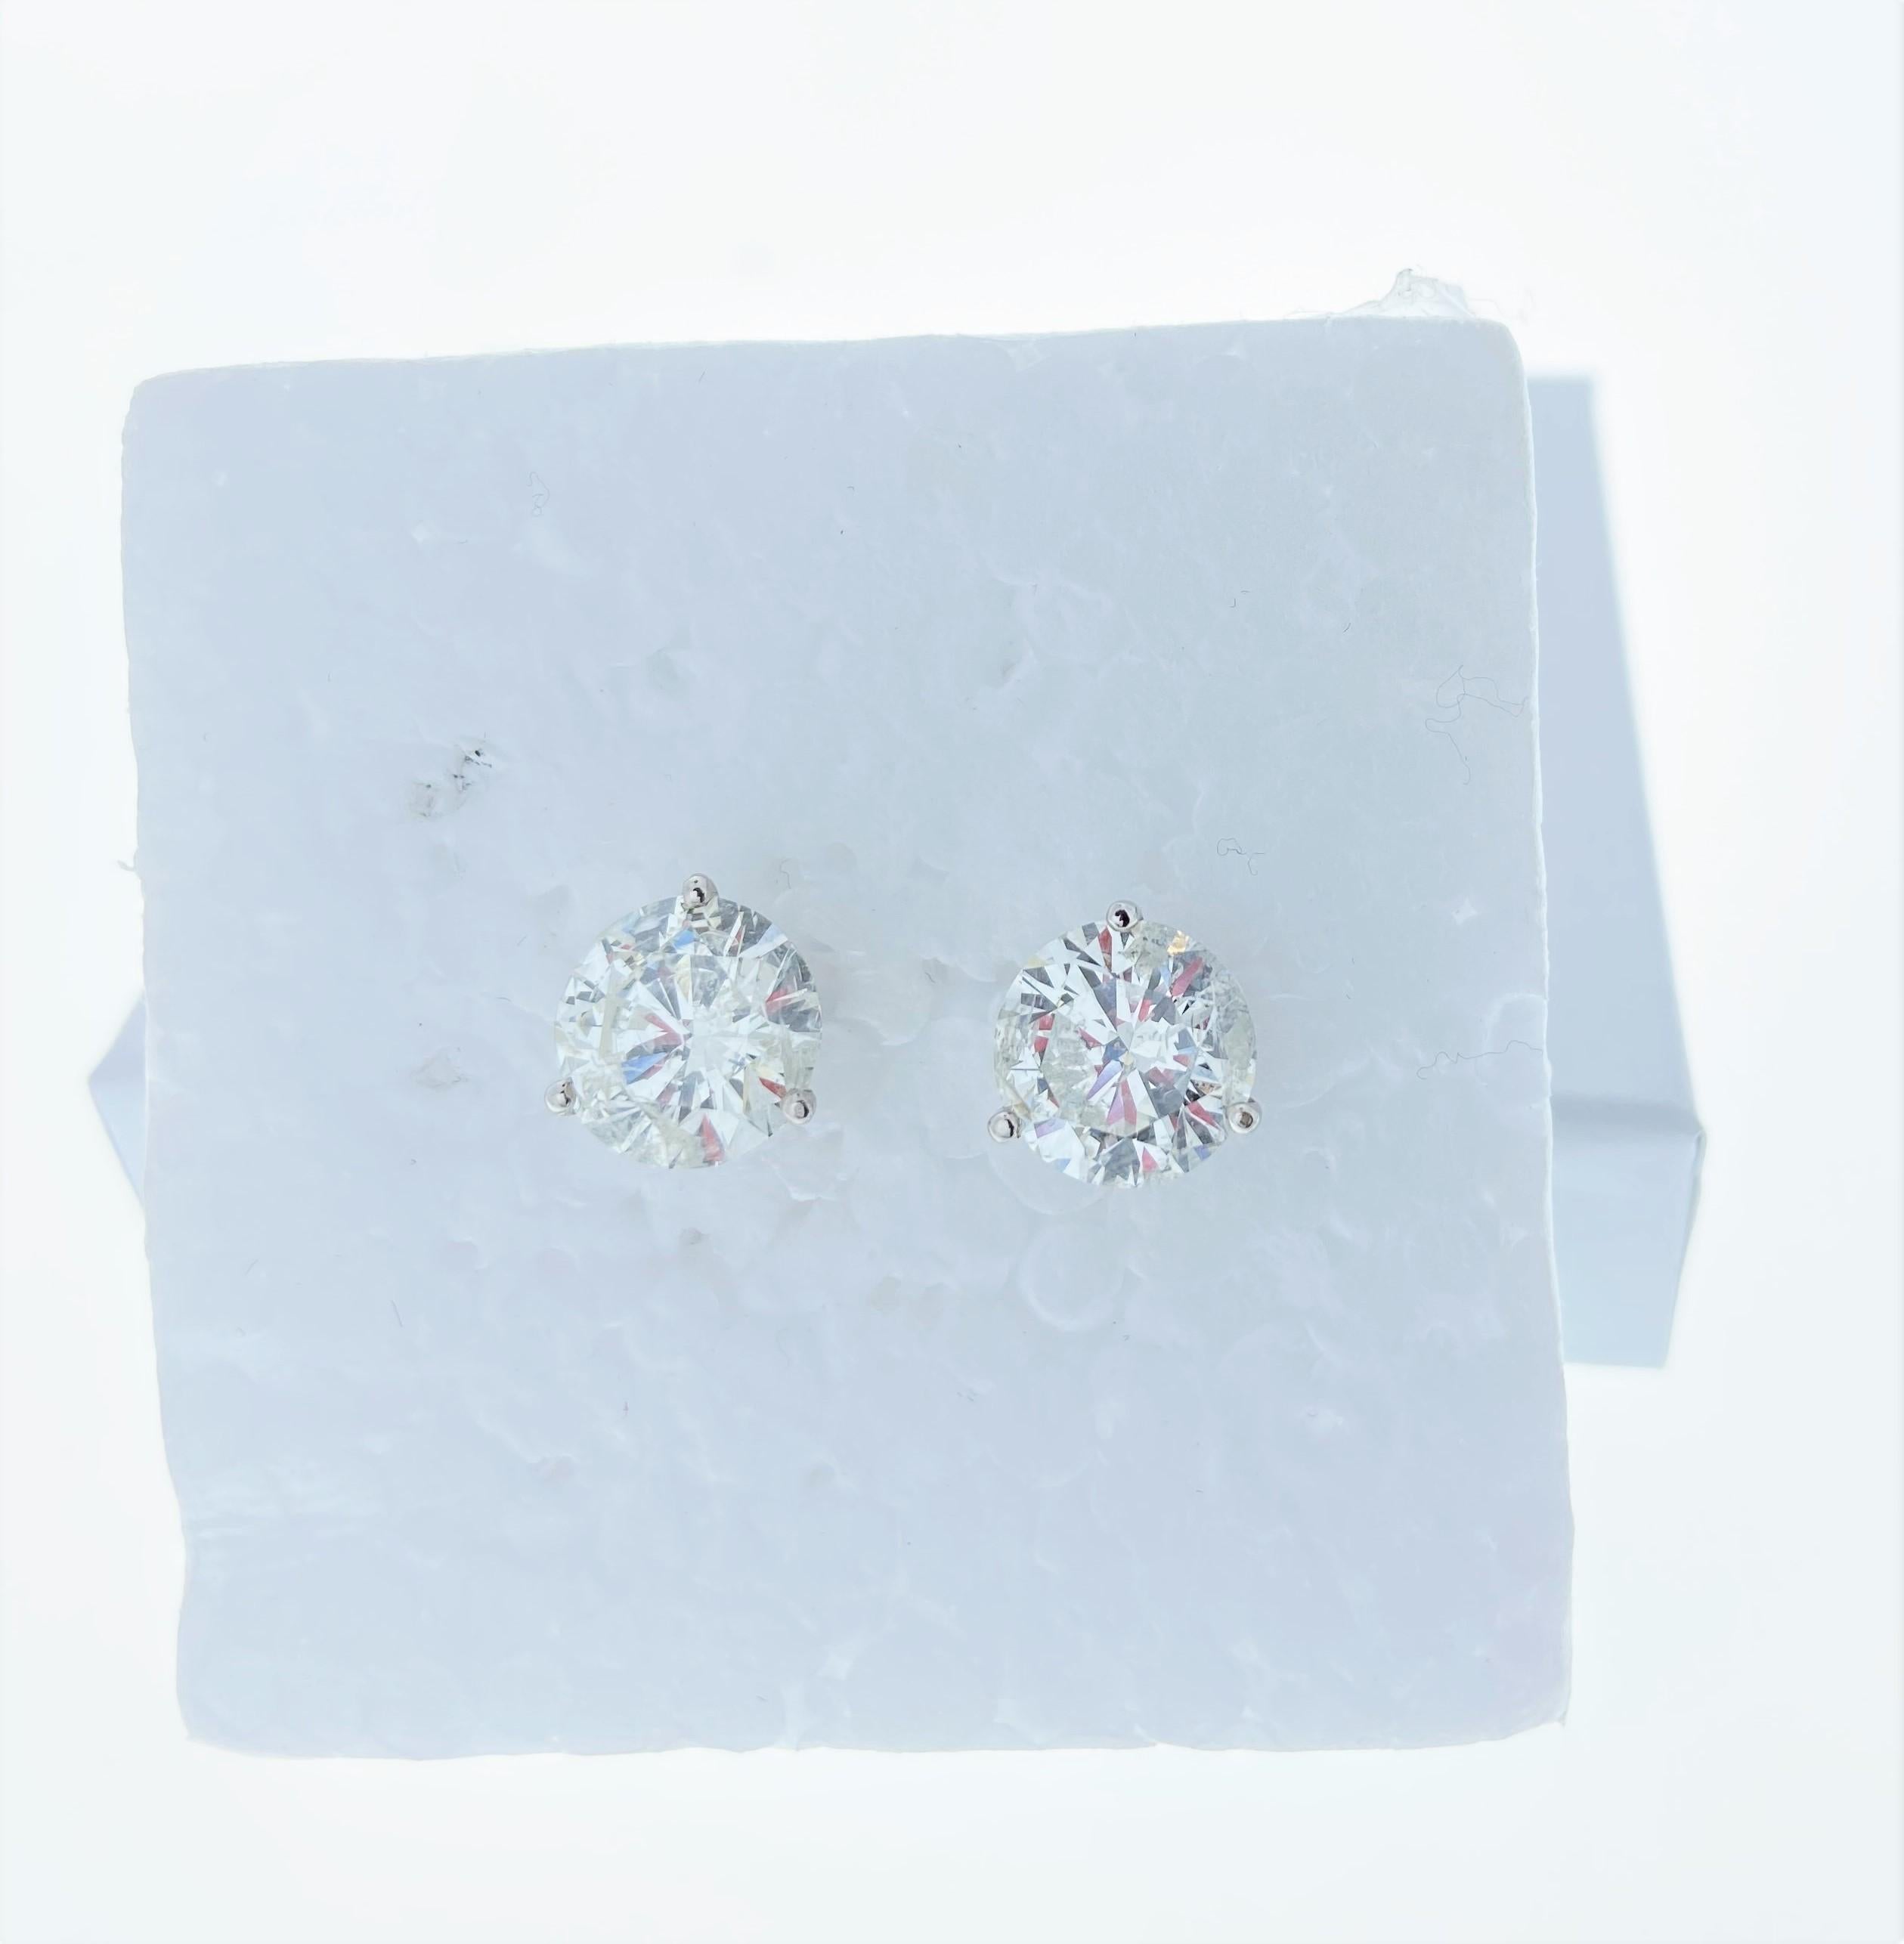 Stunning 14 Karat White Gold EGL USA certified handmade earrings featuring 2 round brilliant cut diamonds weighing 5.10 cts total H-I color I1 clarity. The stunning earrings measure 8.75 mm in diameter, these gorgeous earrings are classic and